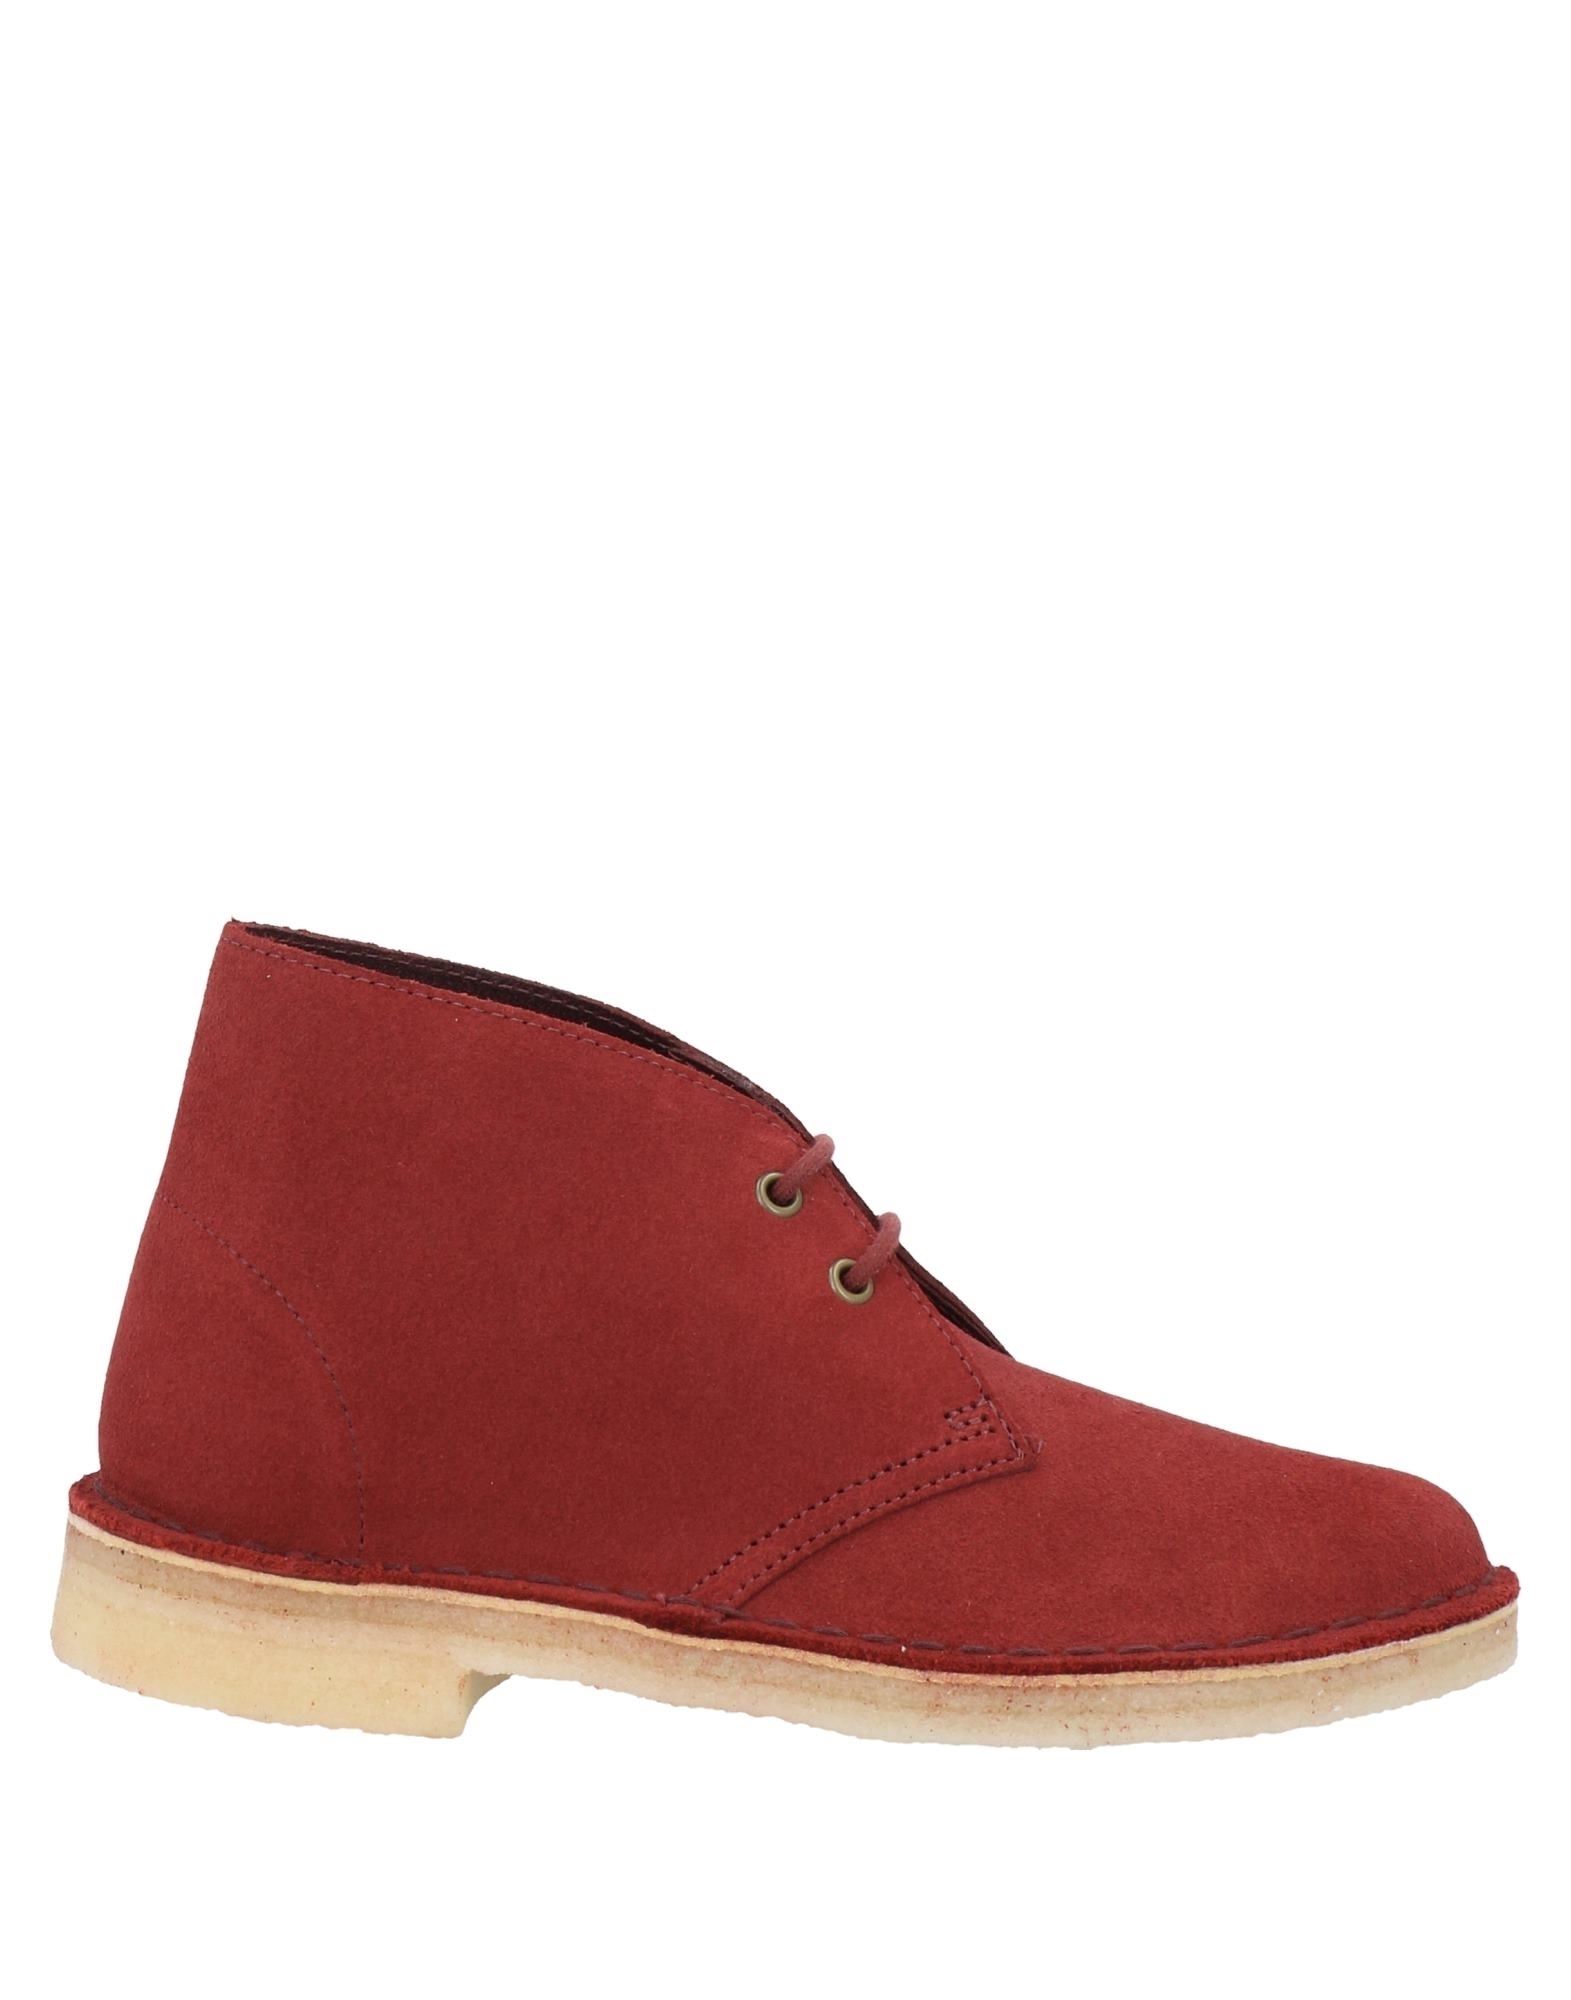 Clarks Originals Ankle Boots In Brick Red